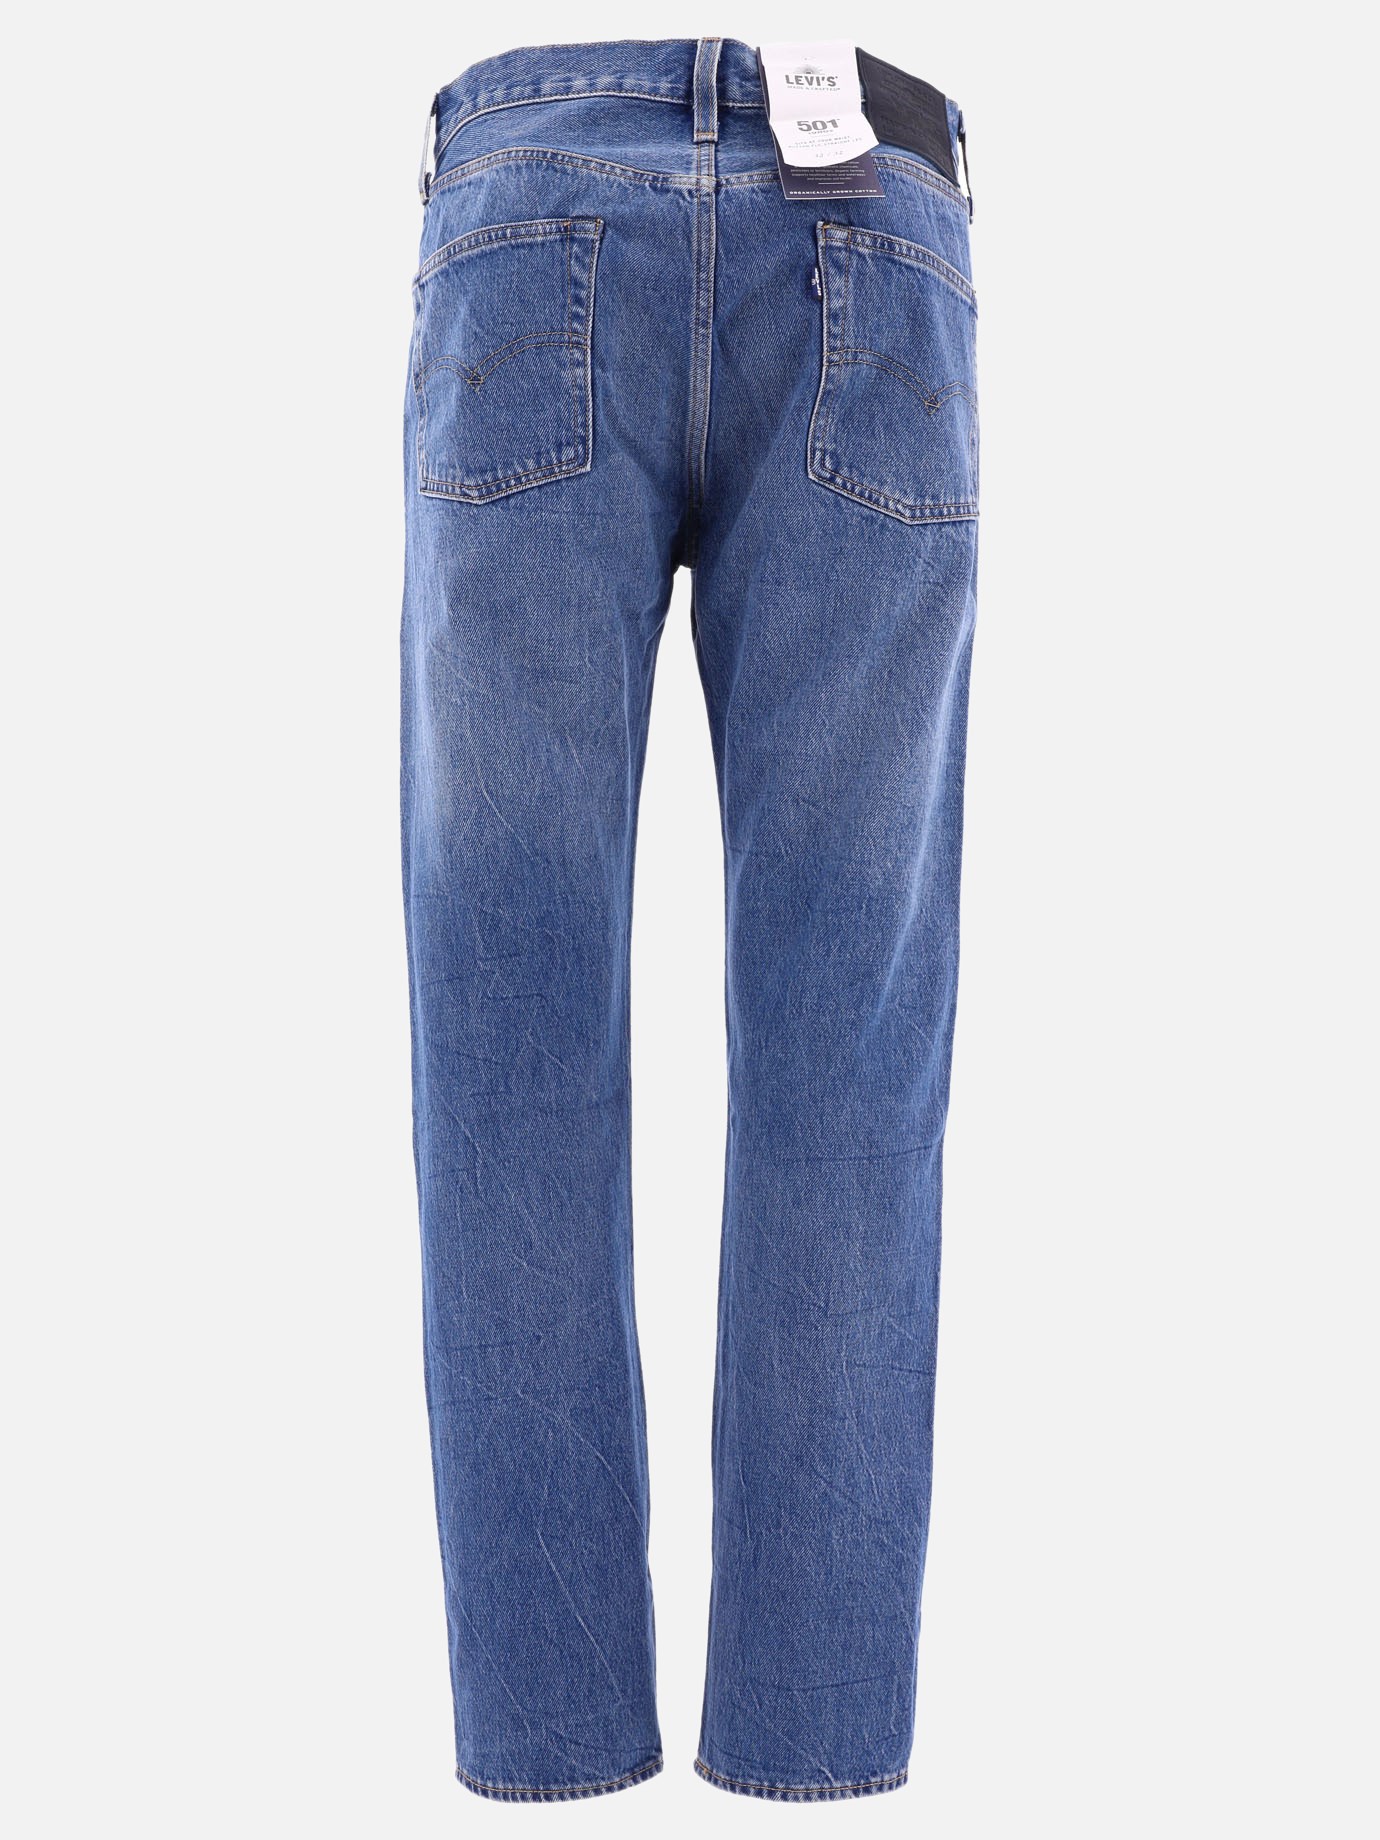 Jeans  501 1980s  by Levi's Made & Crafted